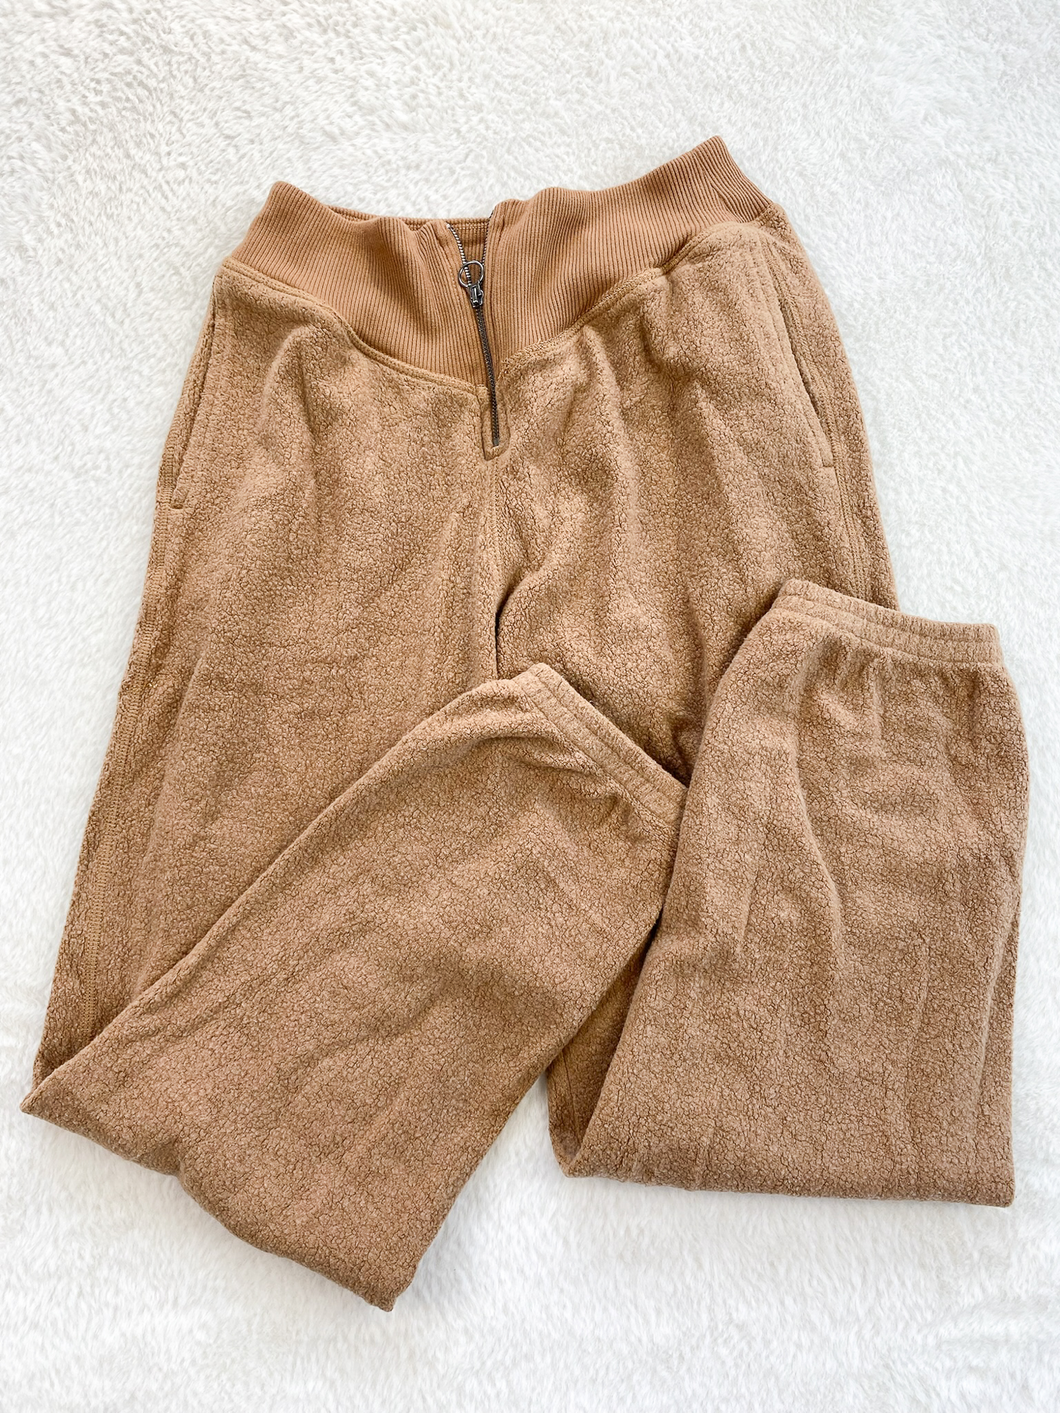 Aerie Pants Size Small *